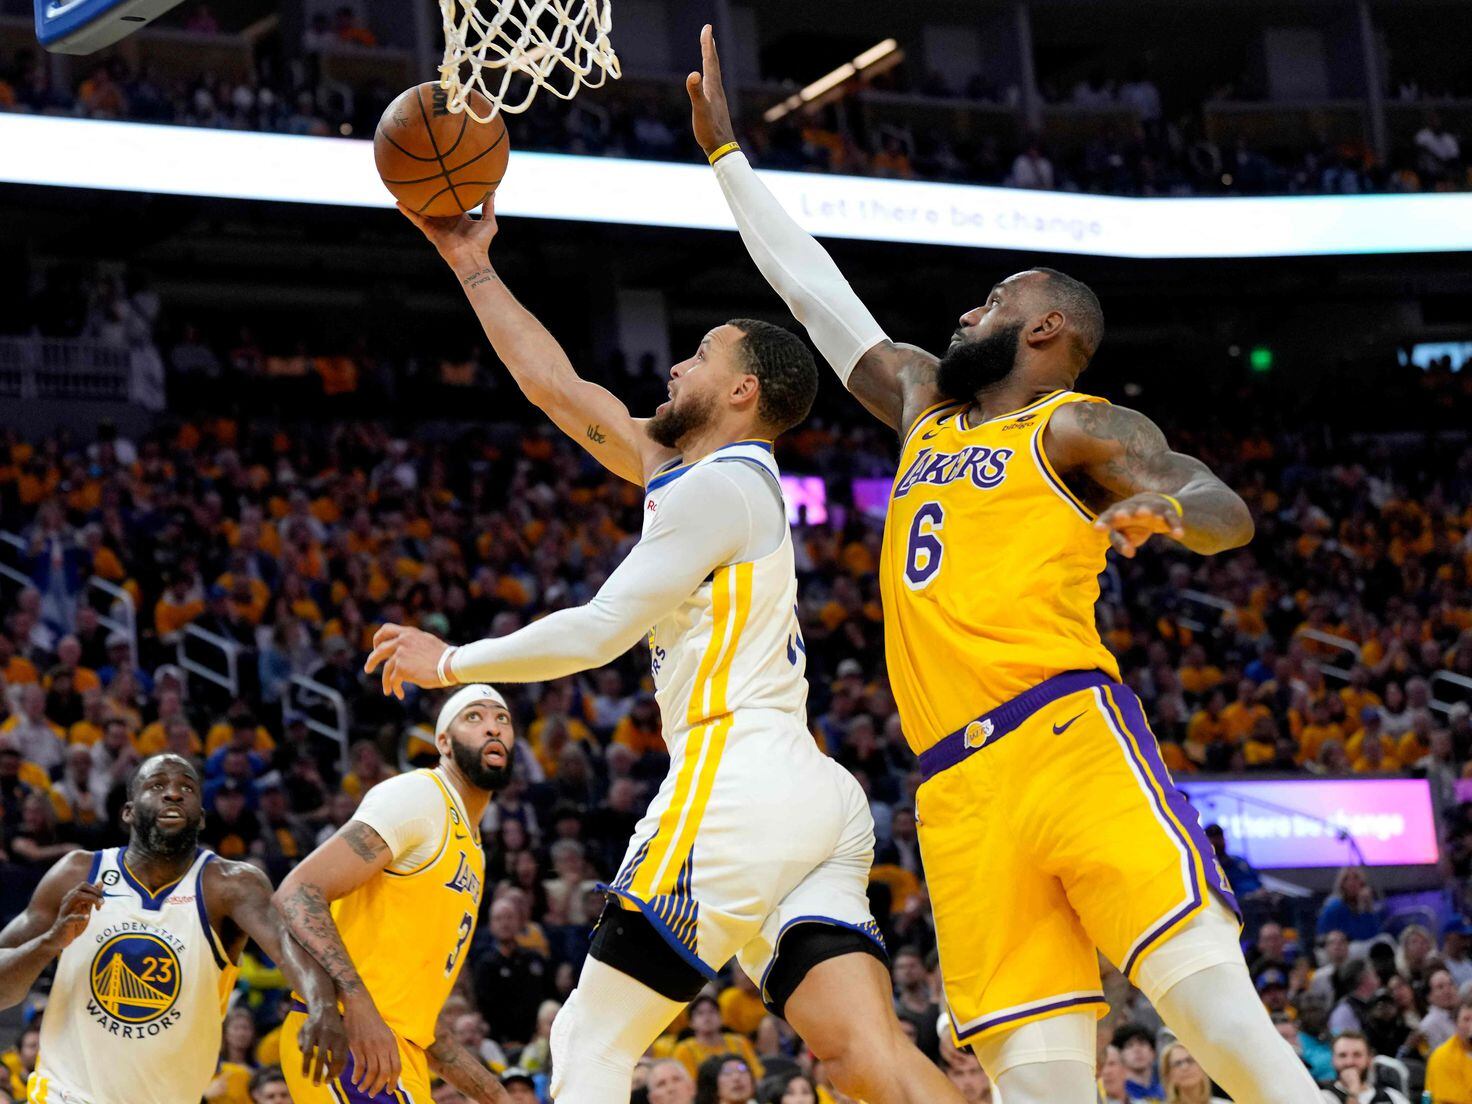 Lakers Survive Slow Start to Take 3-1 Series Lead - The New York Times